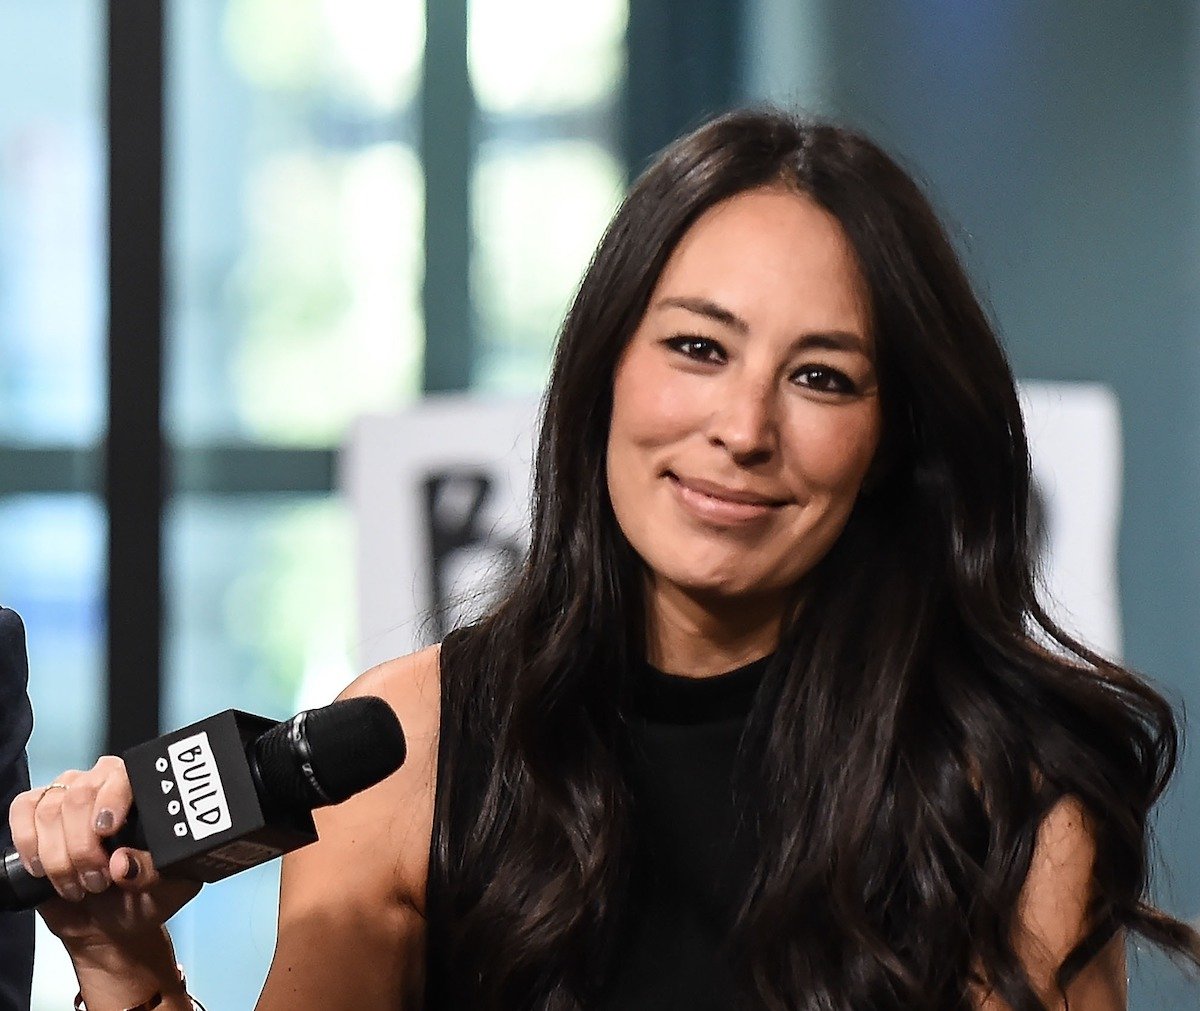 Joanna Gaines at the Build event for Chip Gaines' book Capital Gains